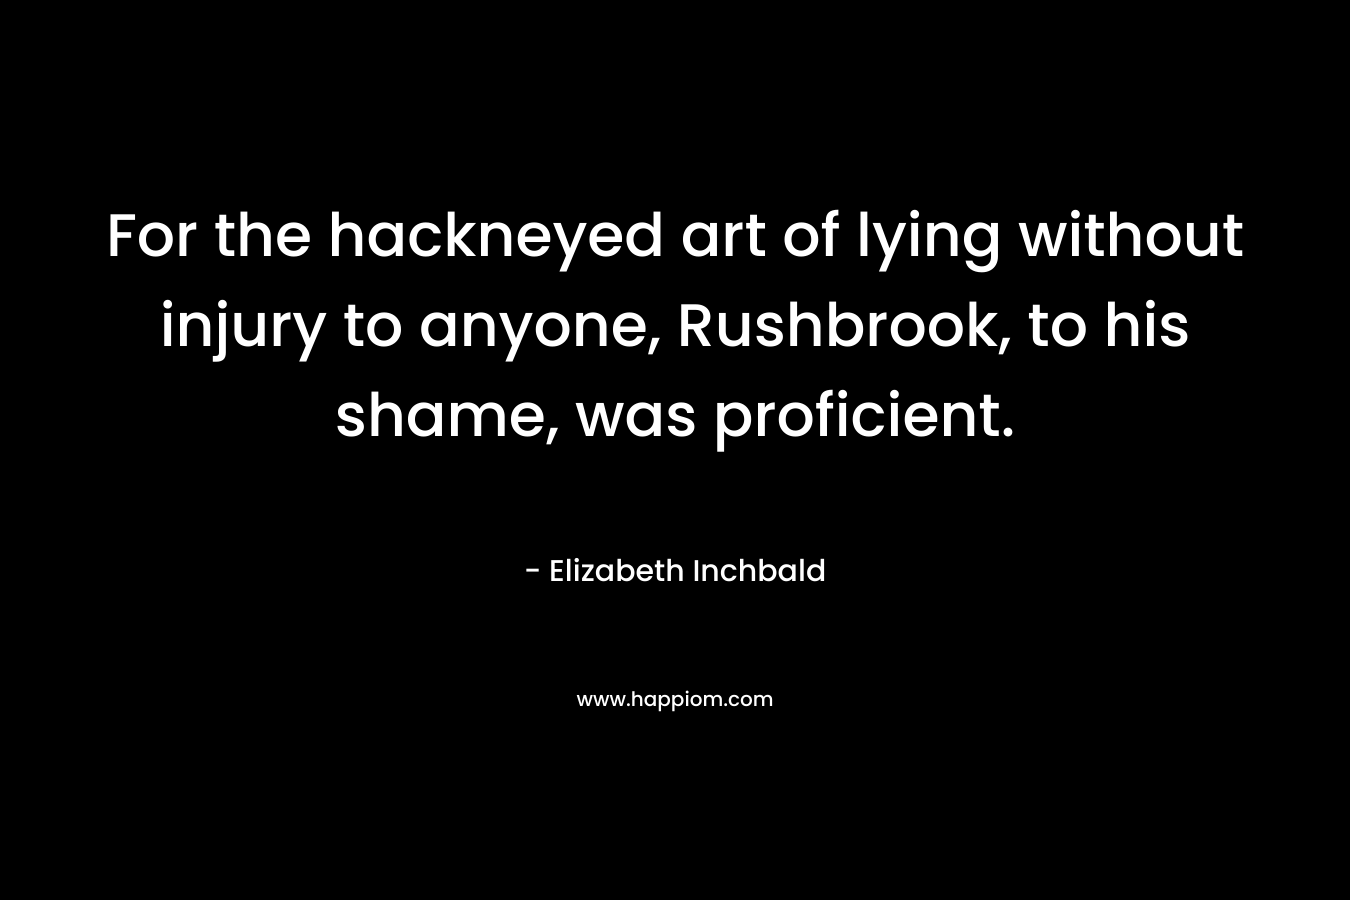 For the hackneyed art of lying without injury to anyone, Rushbrook, to his shame, was proficient.